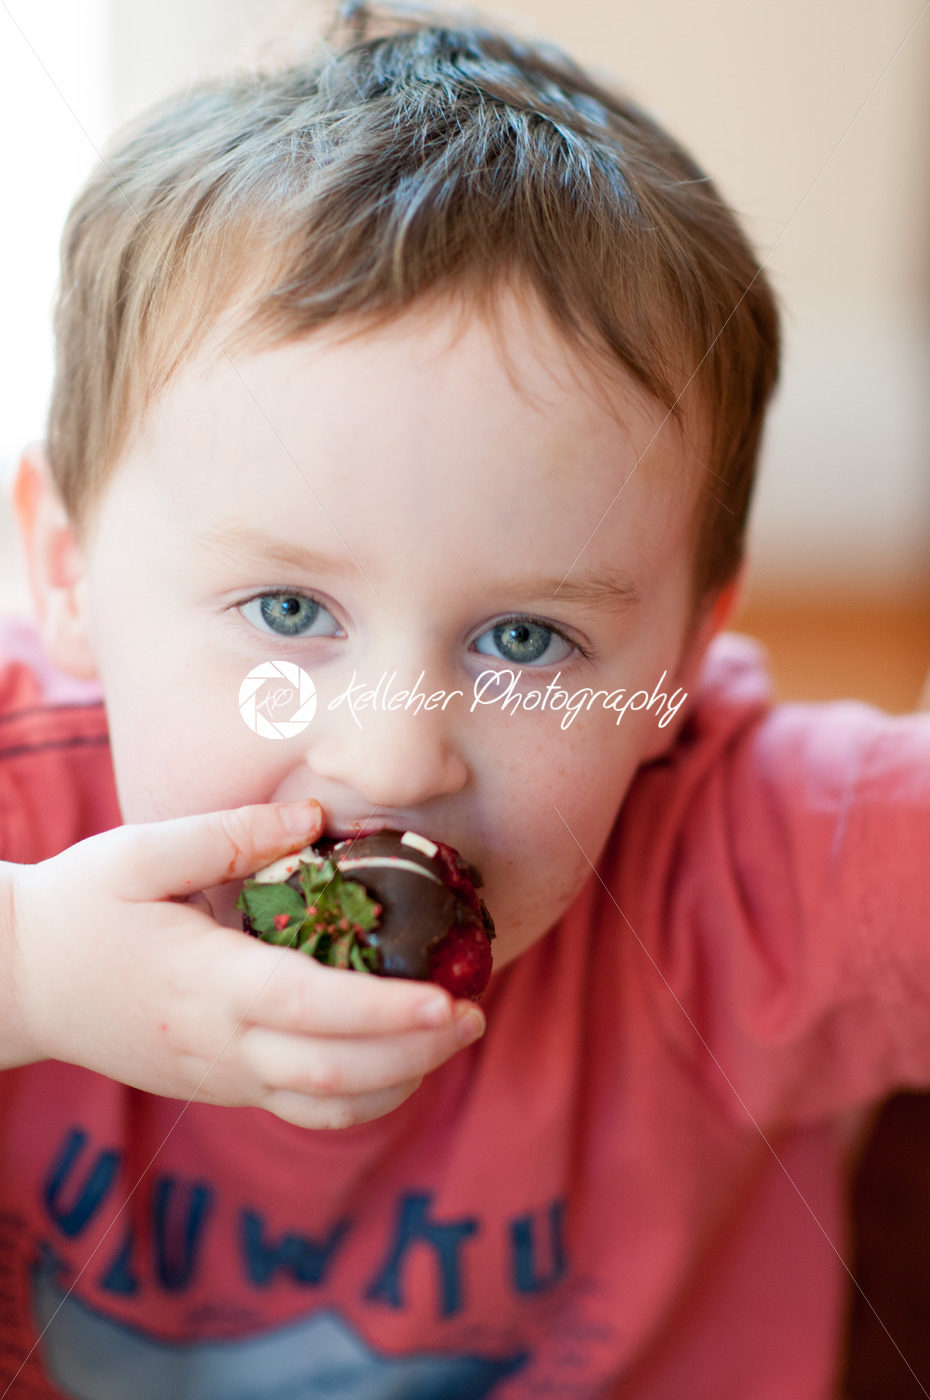 Little boy eating chocolate covered strawberries - Kelleher Photography Store